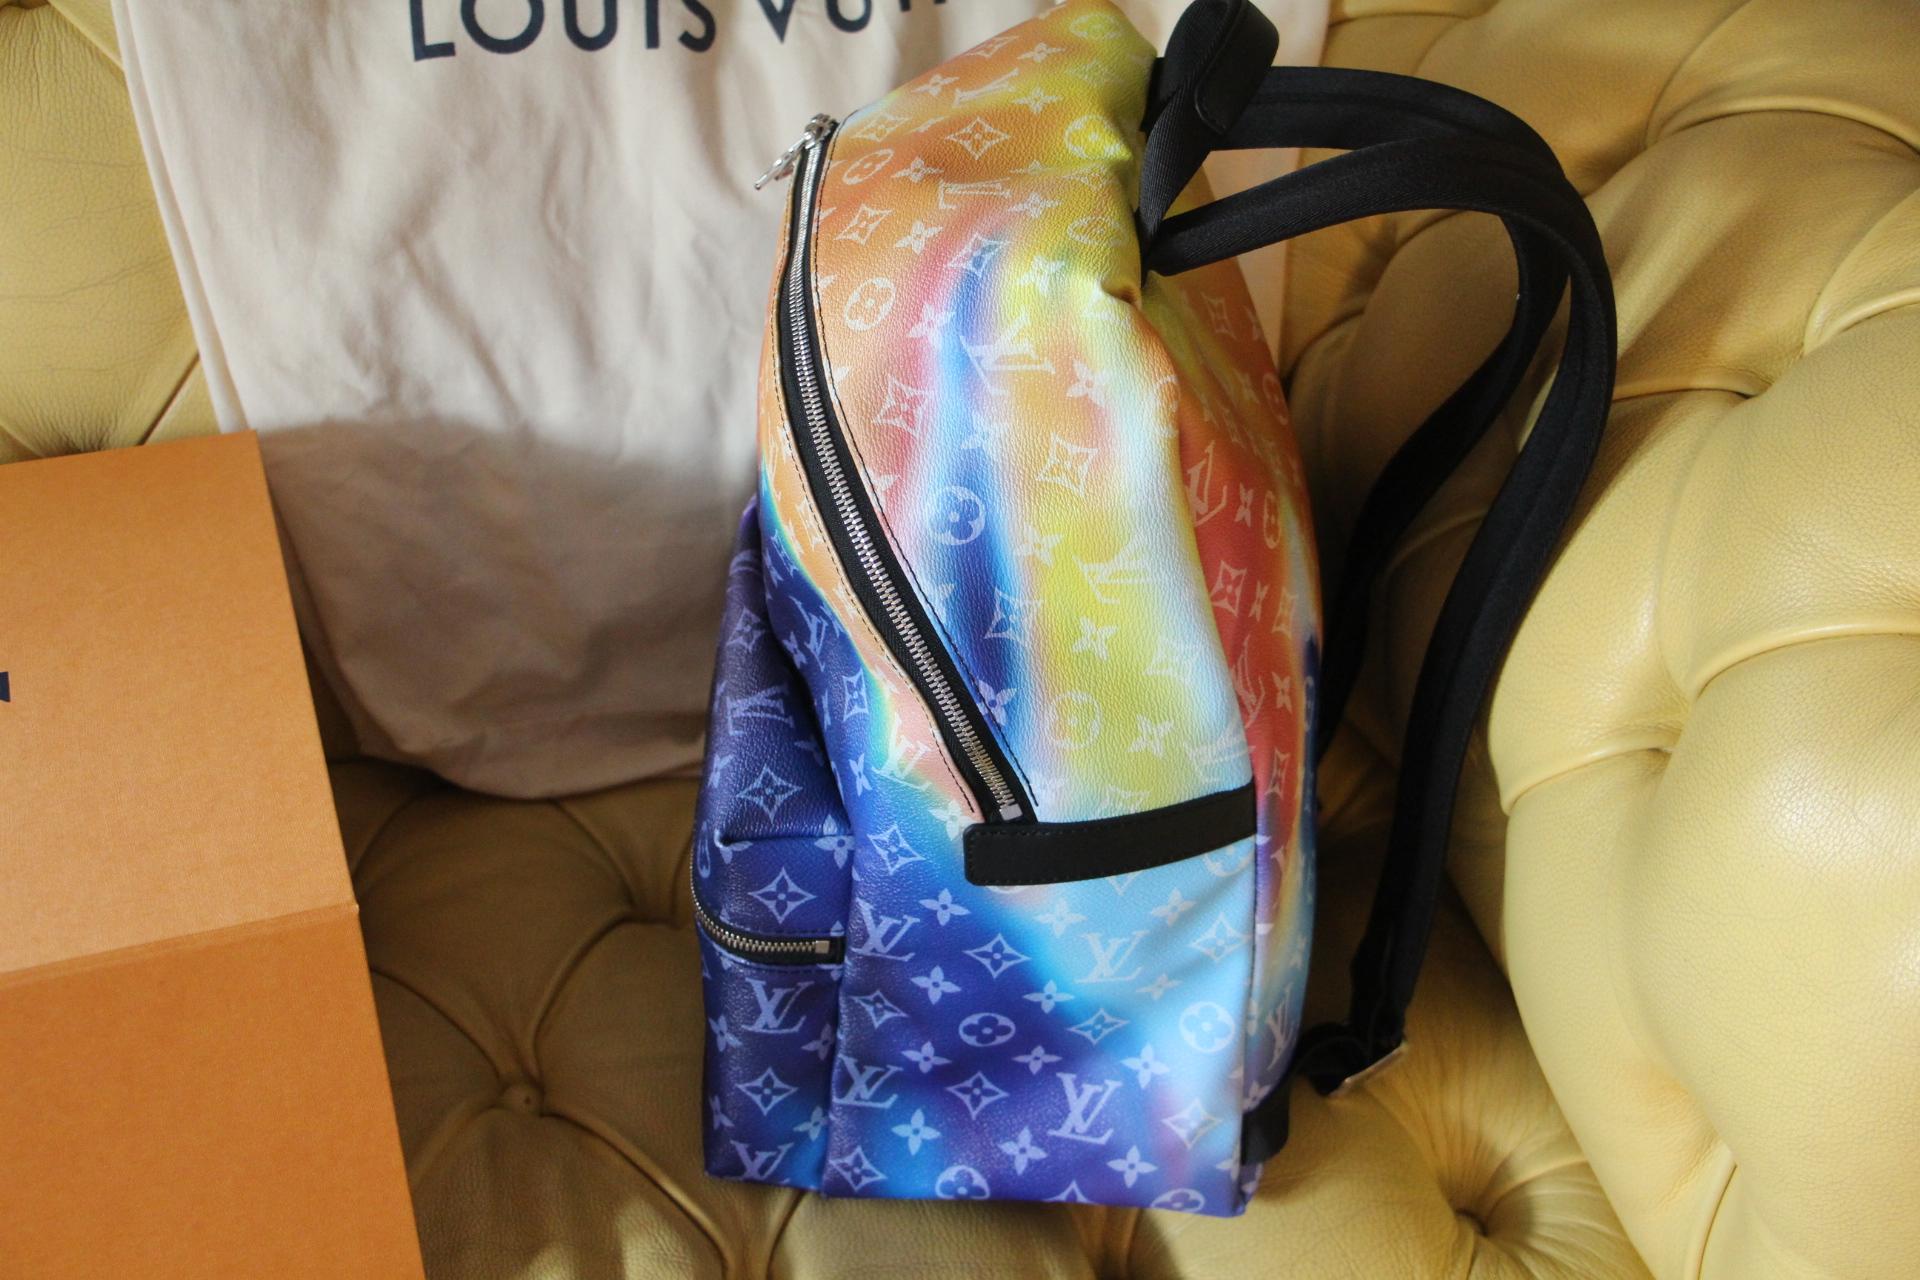 Louis Vuitton Discovery Backpack , very limited Sunset collection by Virgil Abloh 1